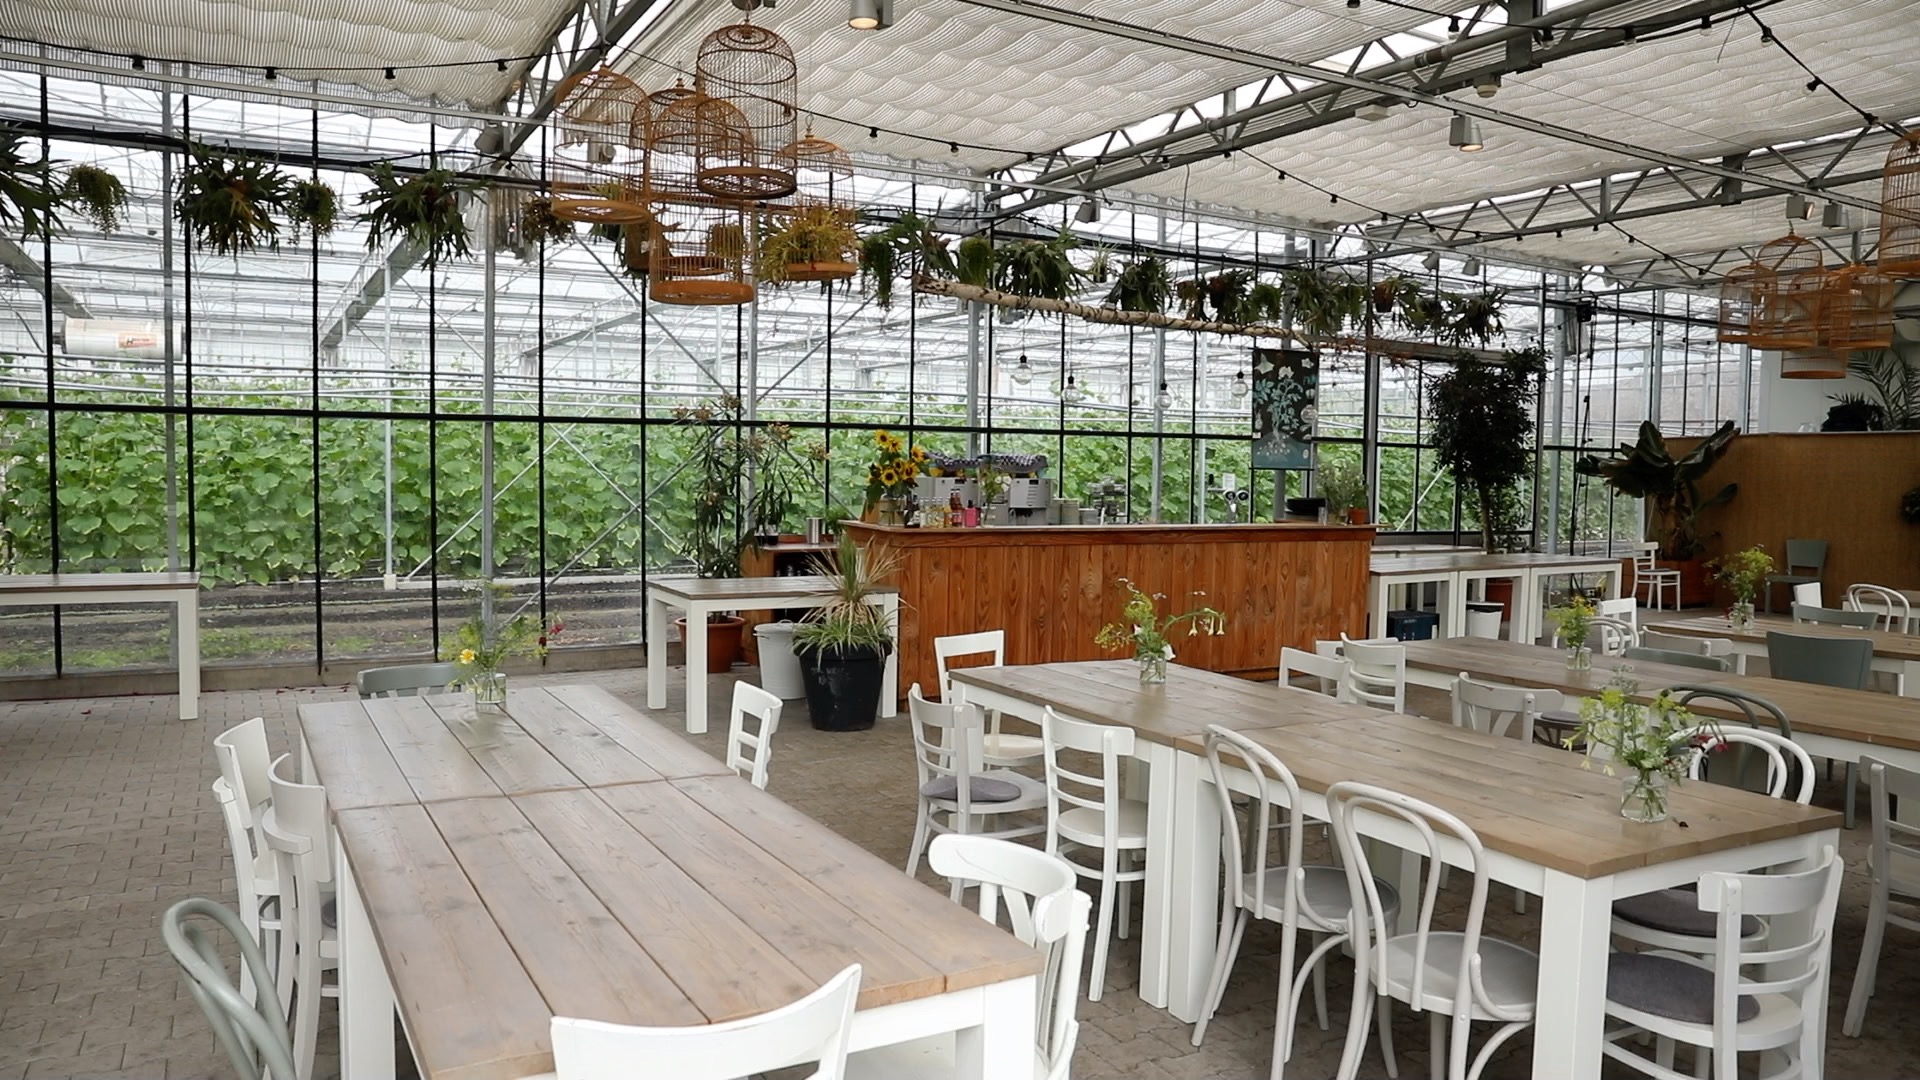 De Oranjerie: a beautiful glass greenhouse, adjacent to our lawn and our greenhouse. Overlooking the colorful garden and greenhouse full of vegetables and fruit.